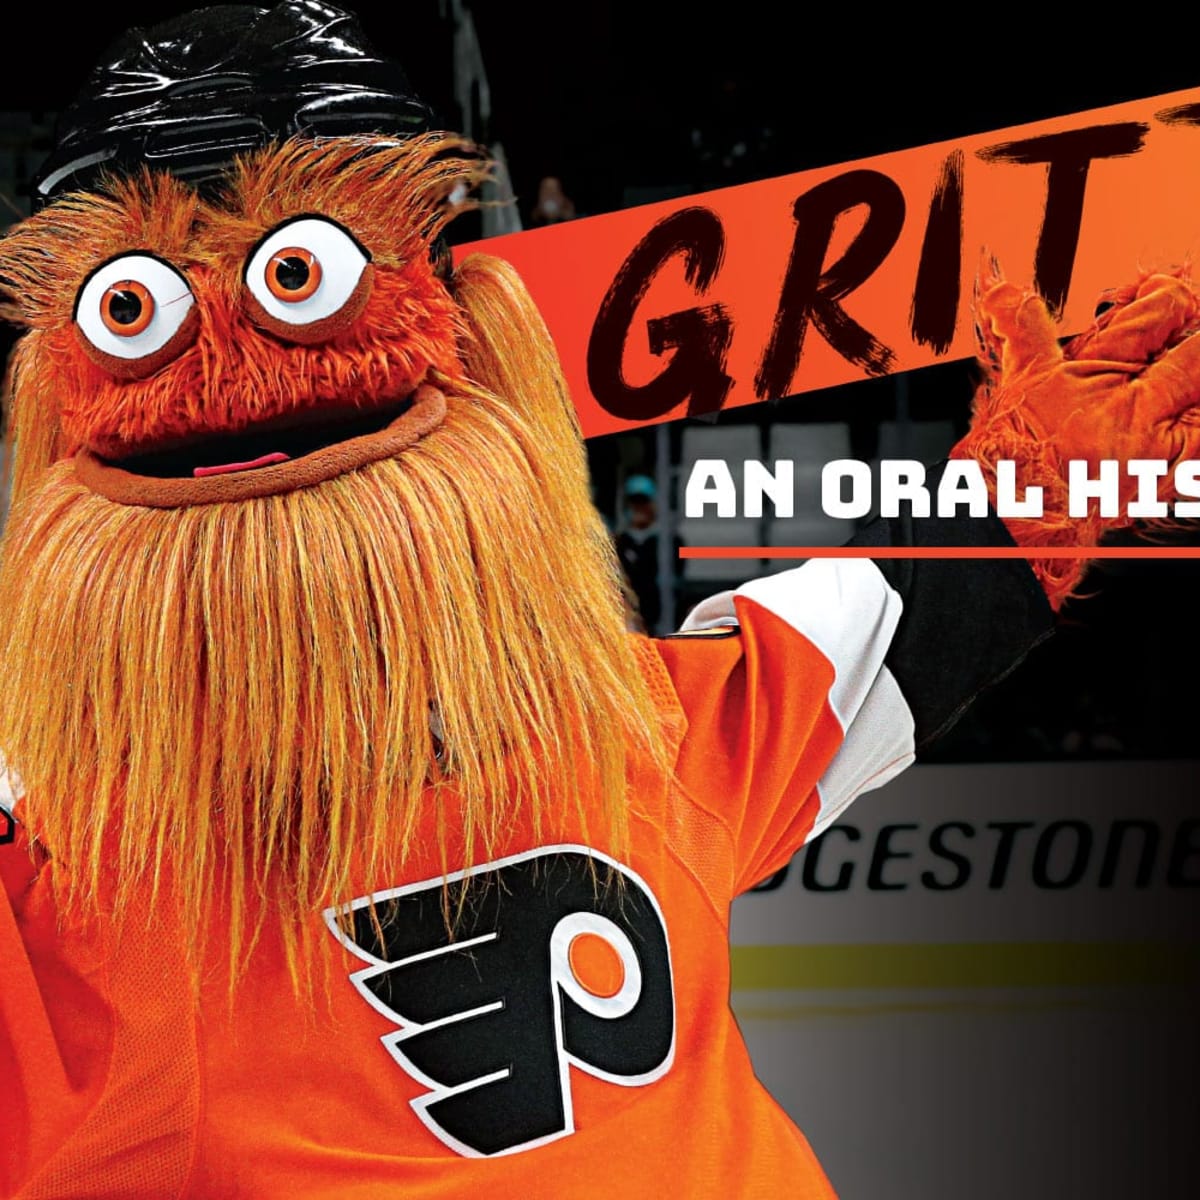 Gritty, the Flyers' new mascot, is set up for success. (According to the Phillie  Phanatic, anyway.)